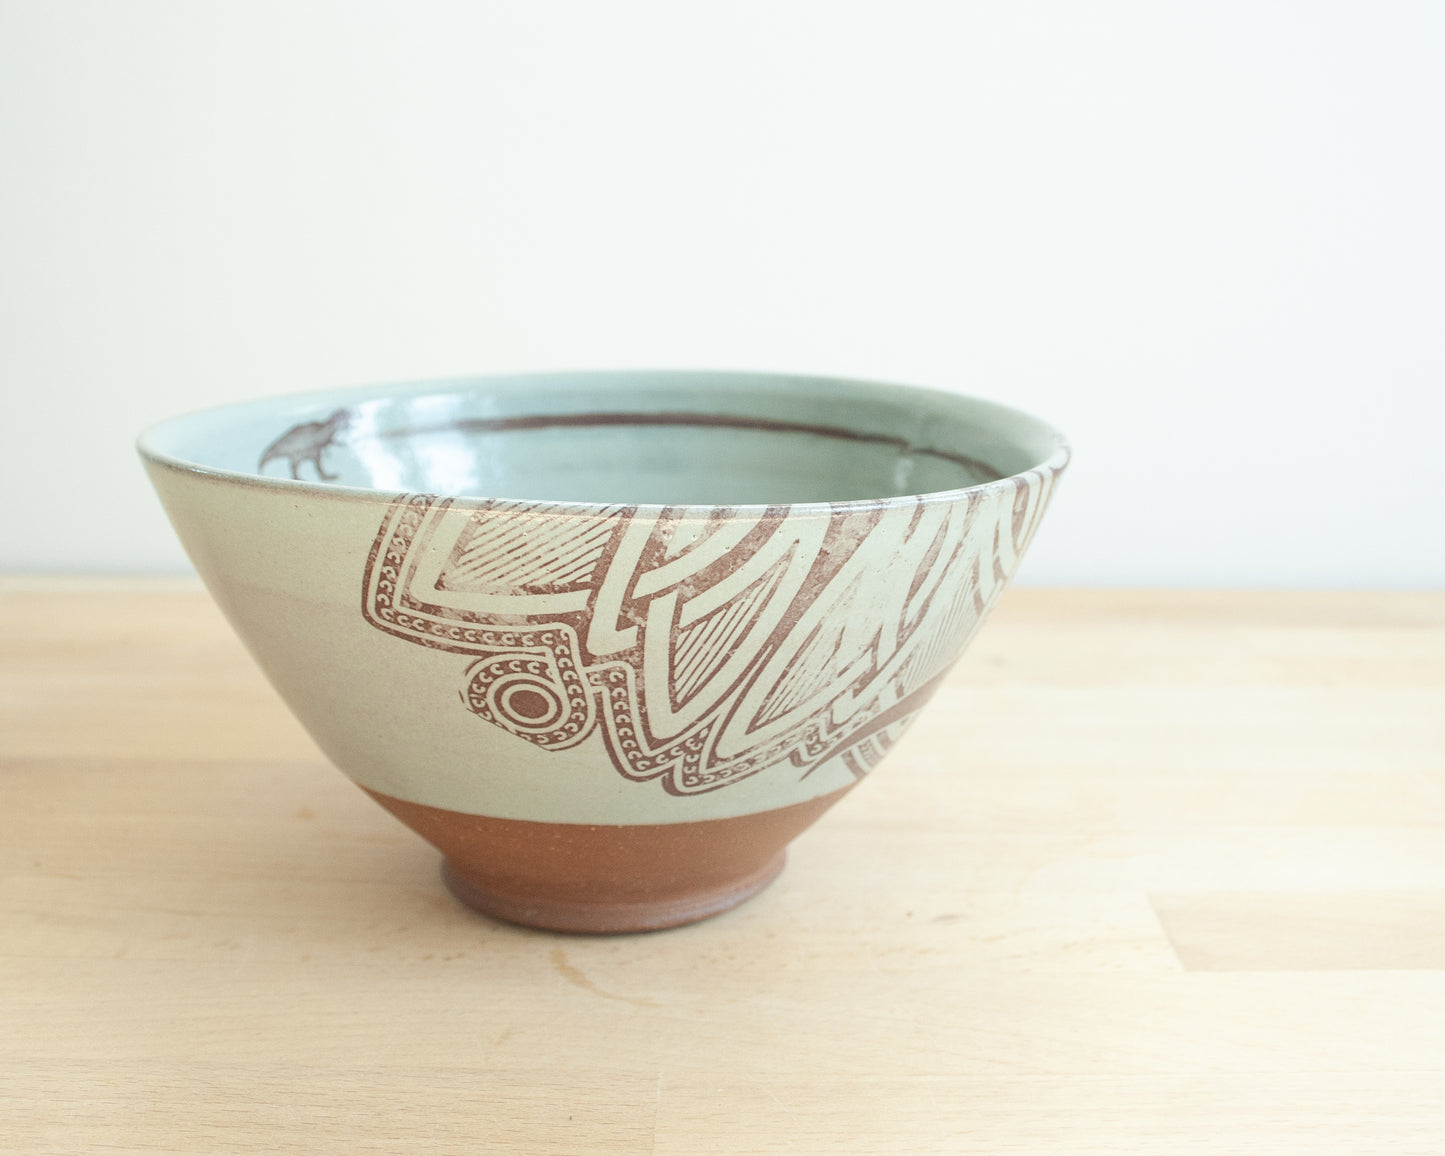 T-Rex Noodle Bowl with background pattern - blue